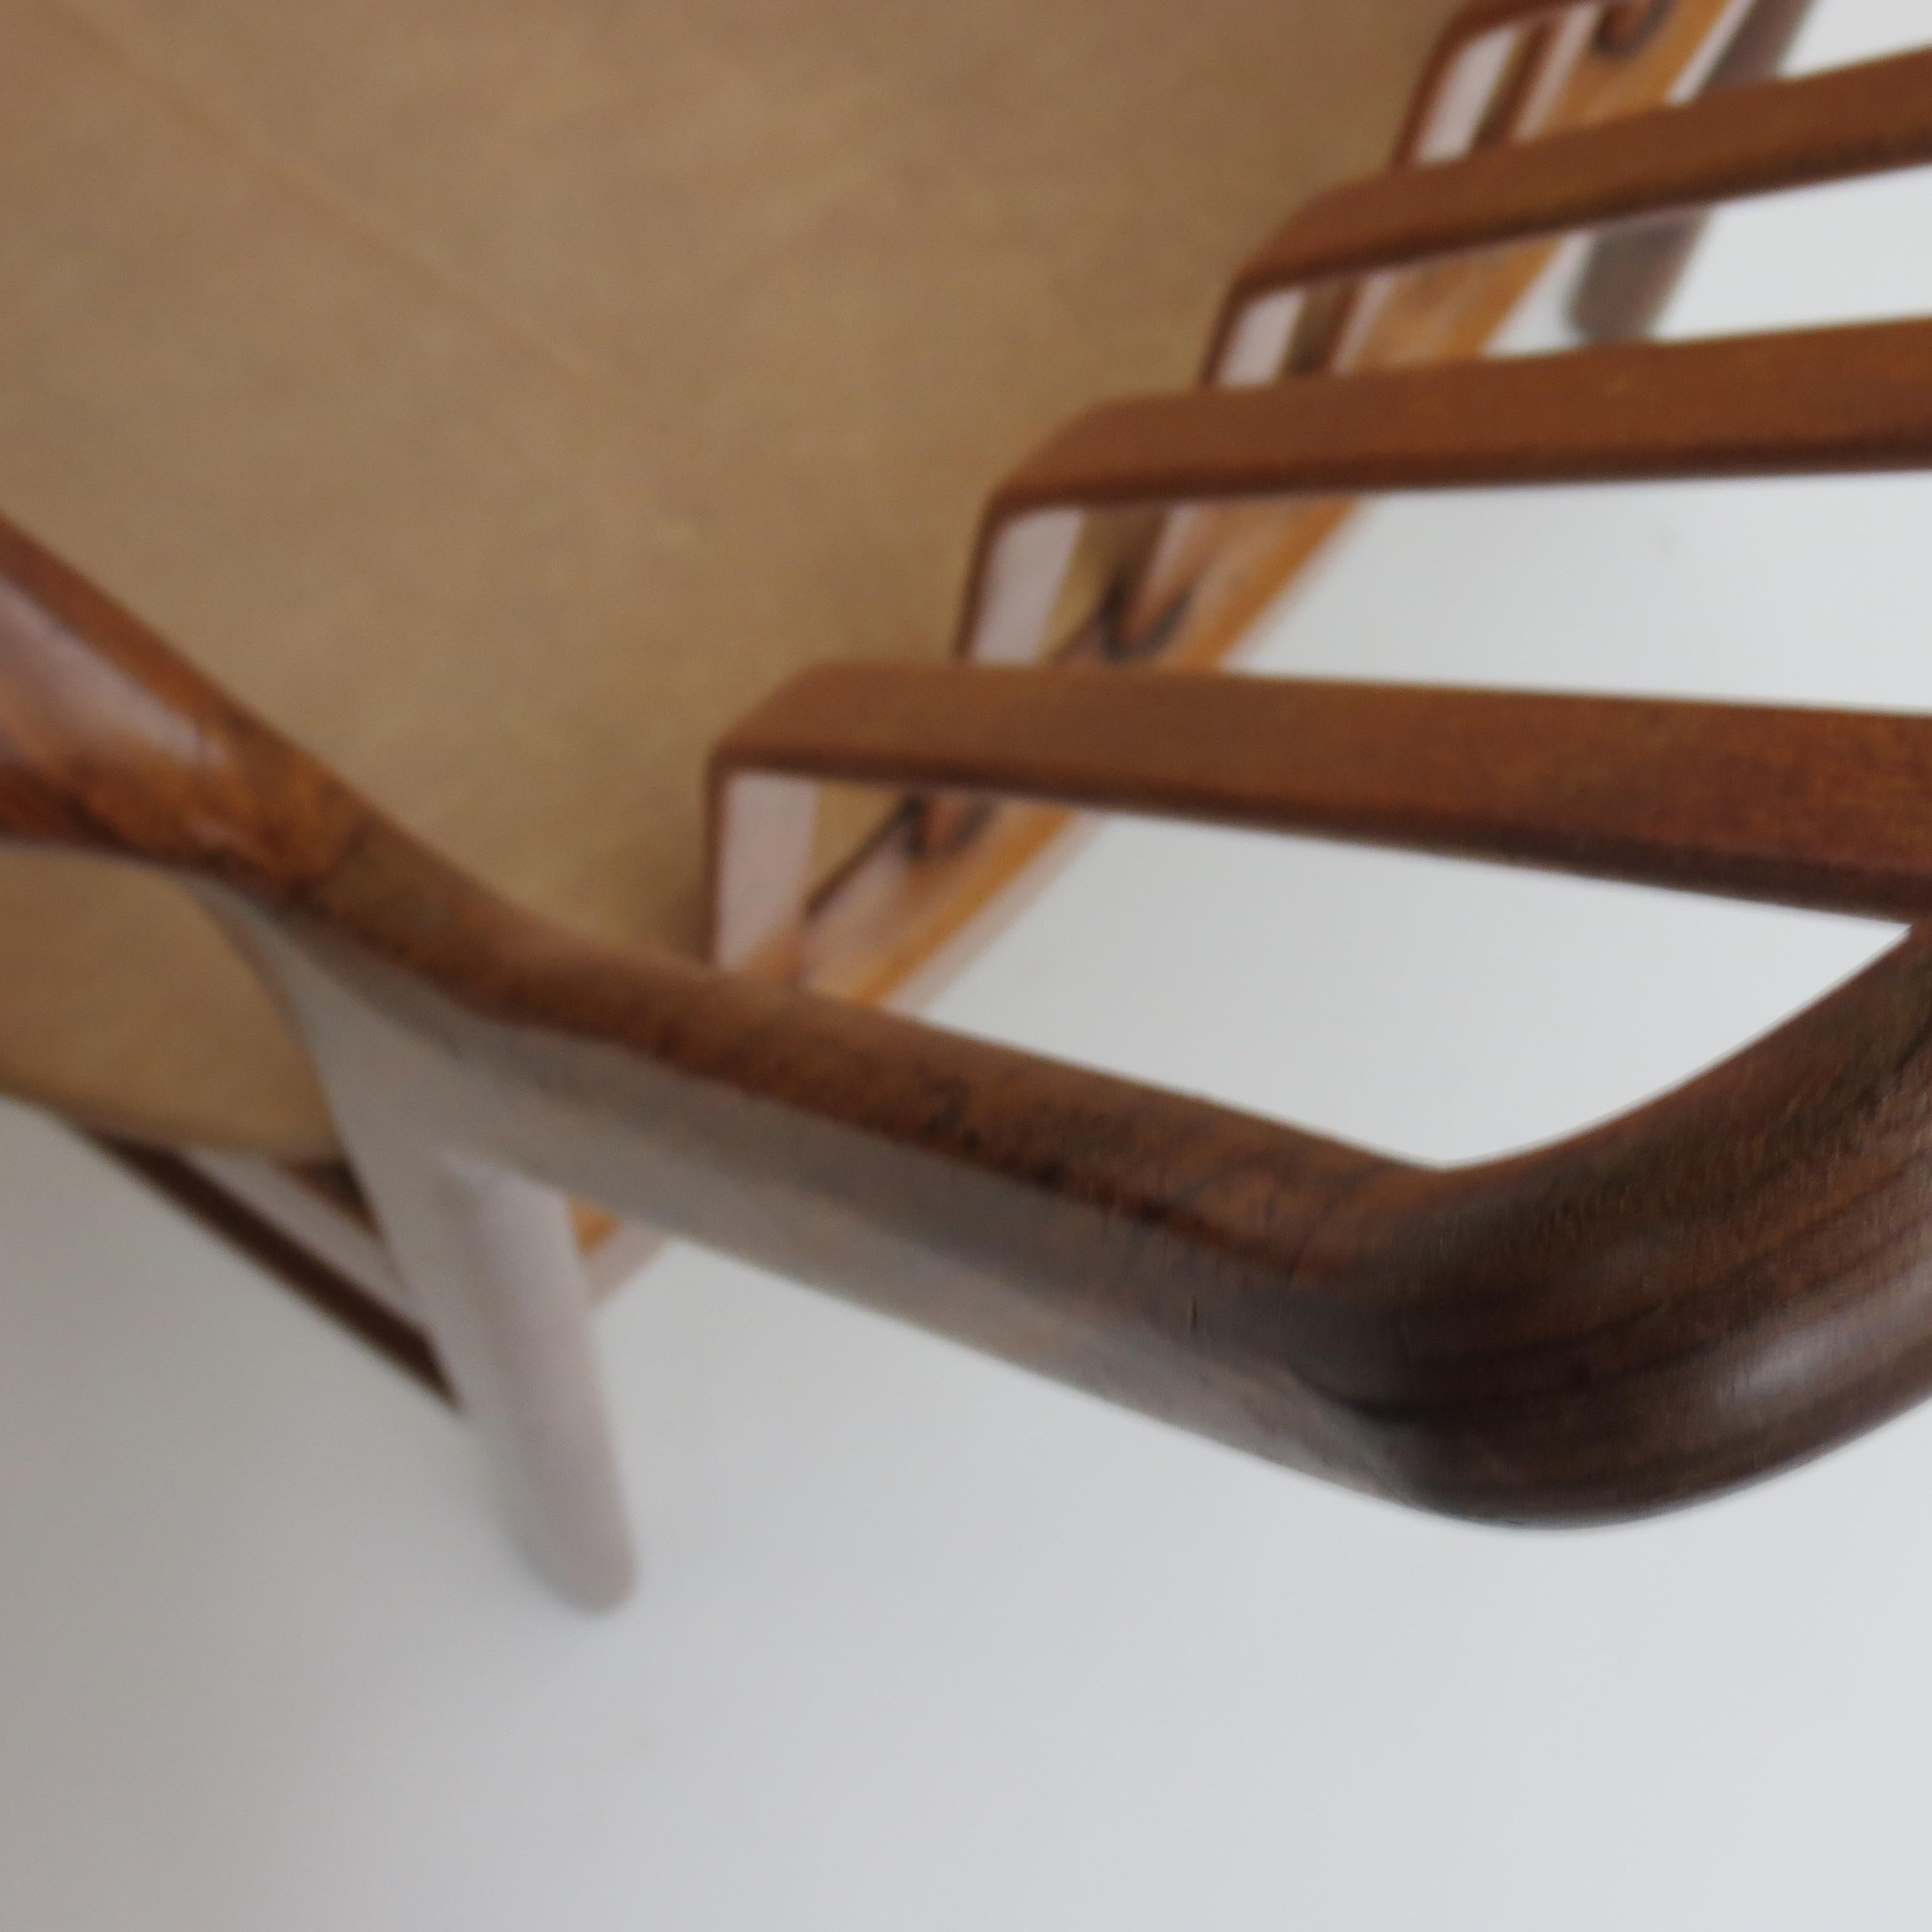 Midcentury Danish Chair by Svend Madsen 1960s Teak with Leather Seat 6